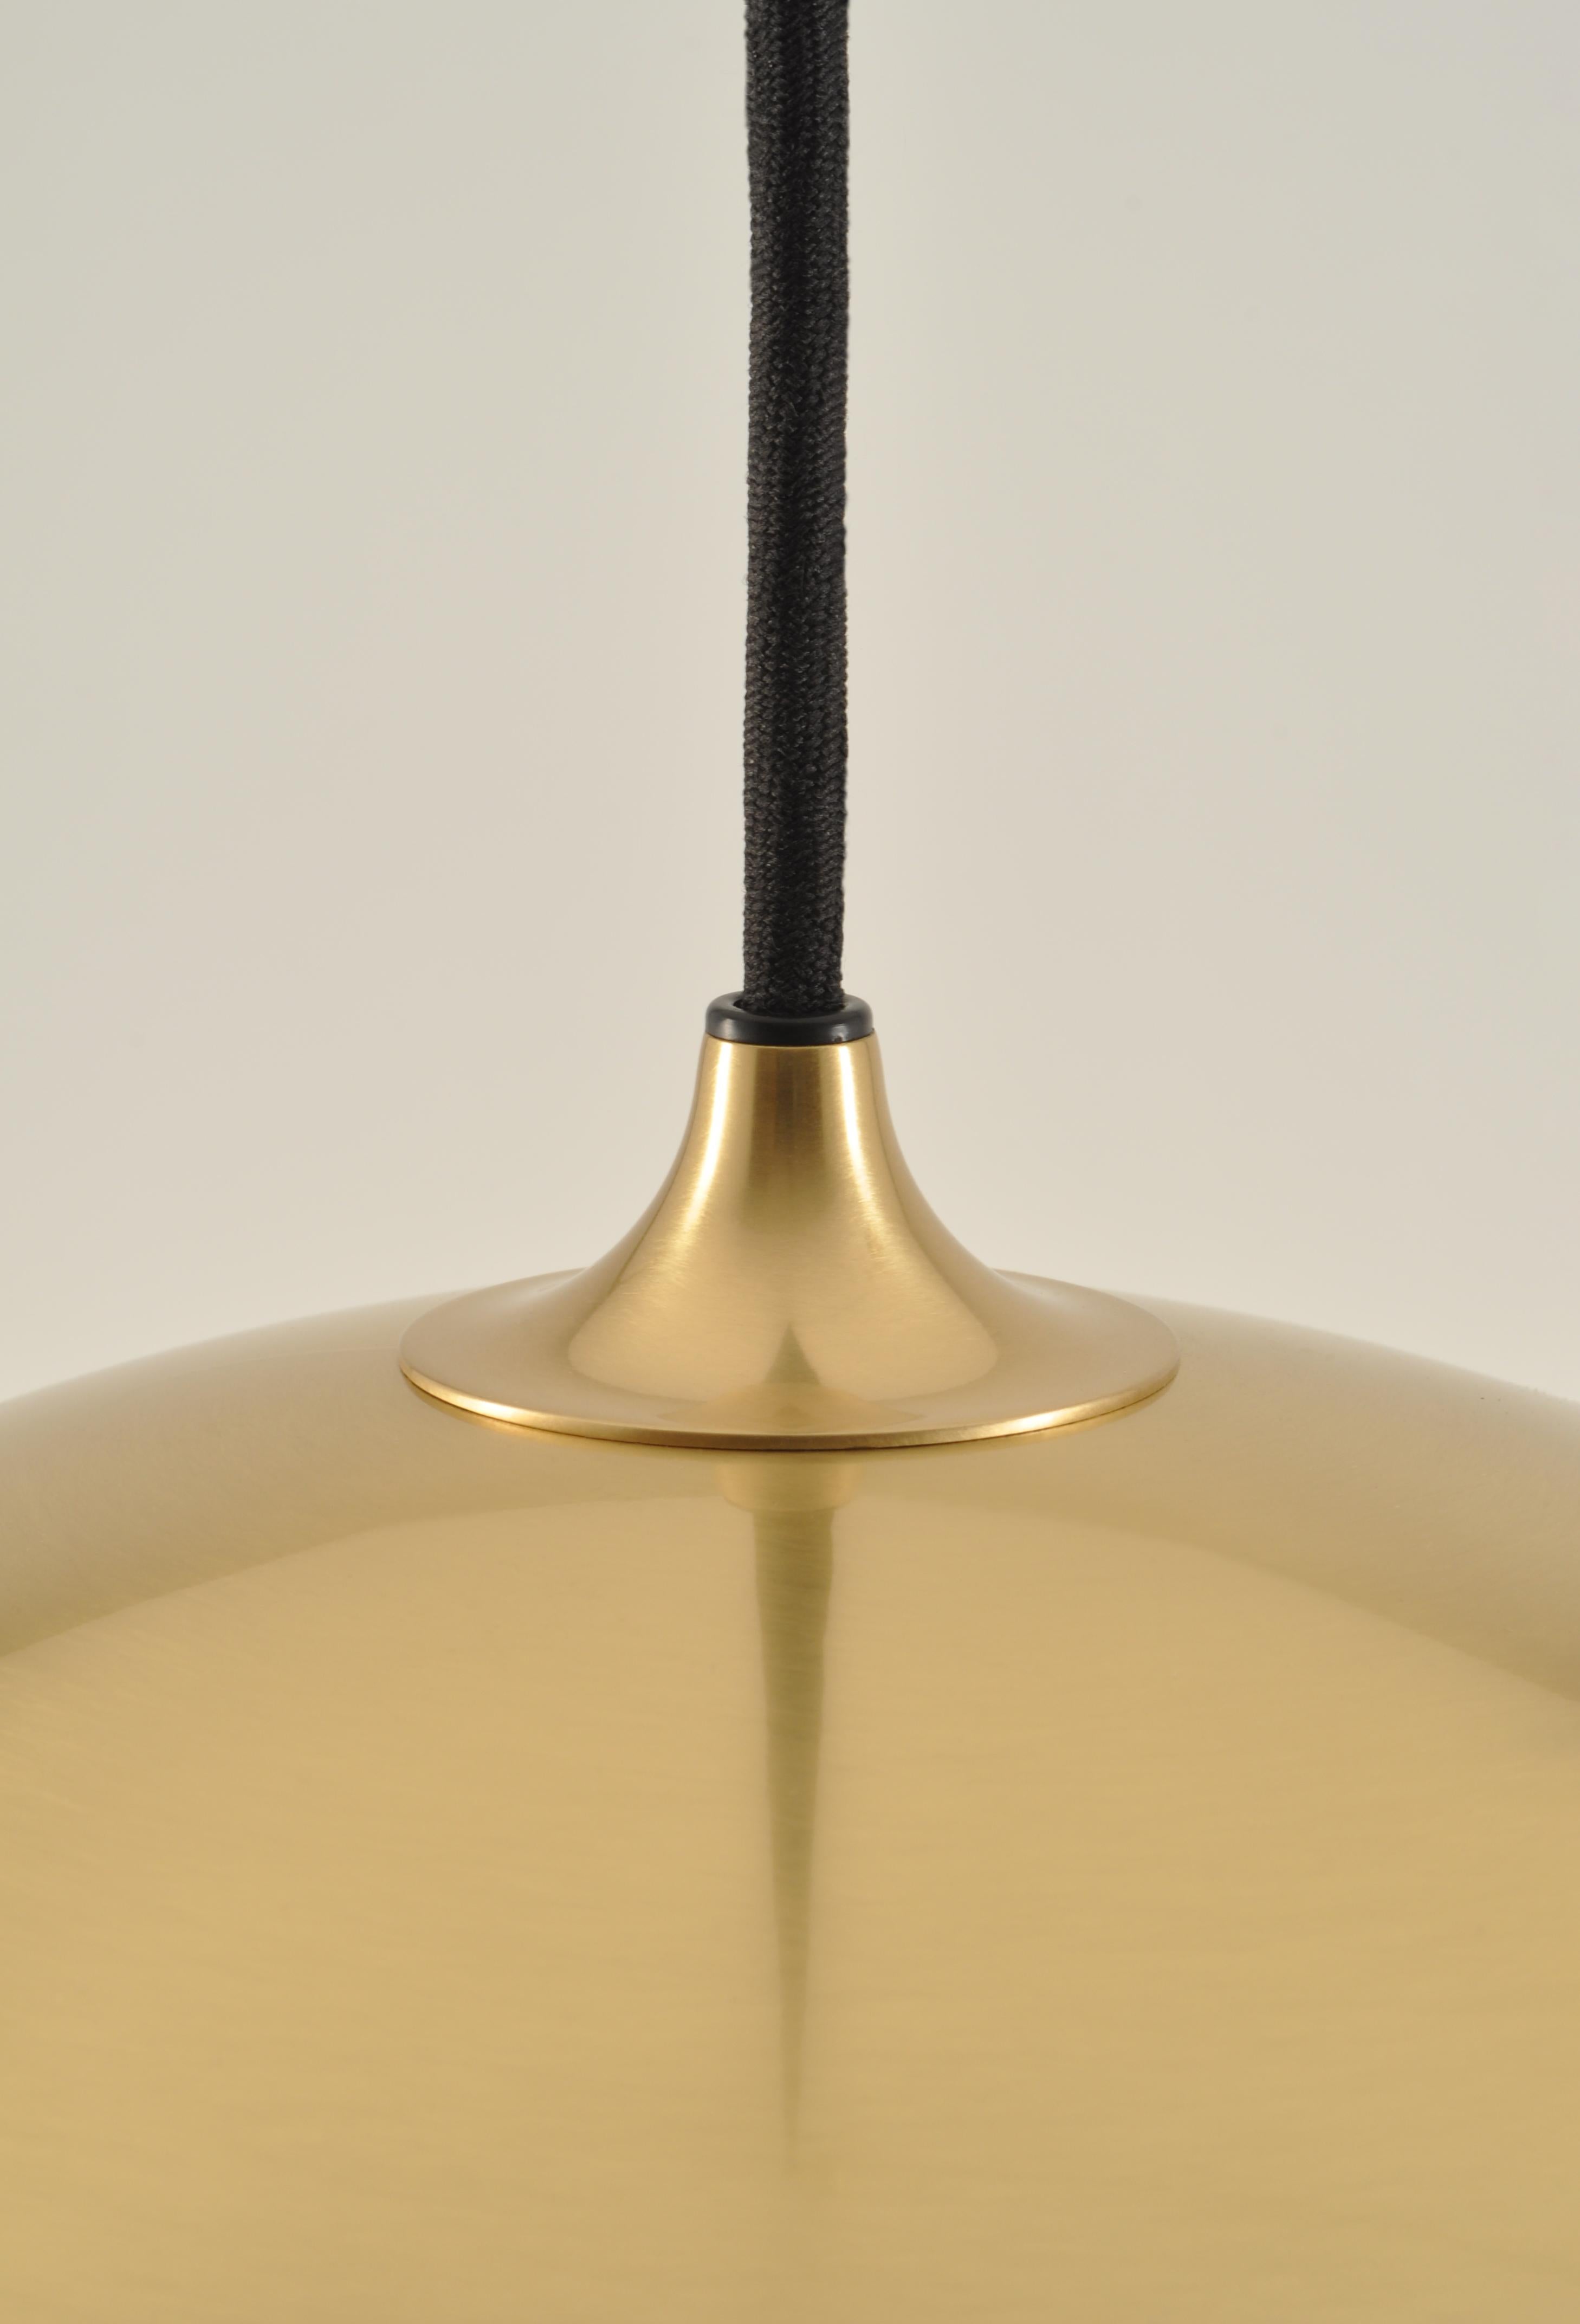 German Florian Schulz Duos 36 Counterbalance Pendant Lamp in Polished Brass or nickel For Sale